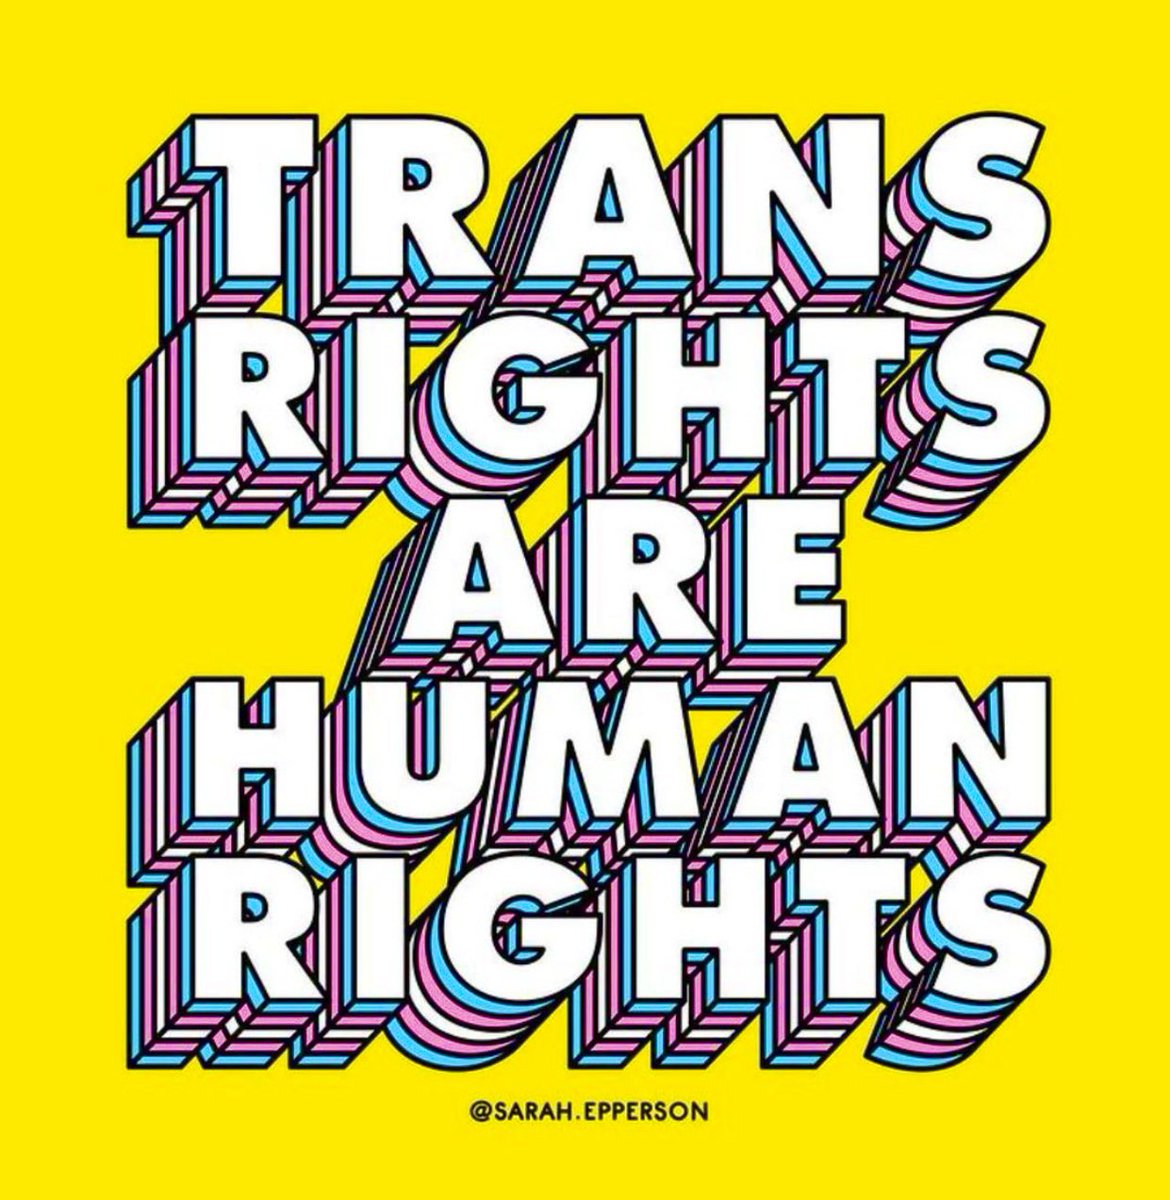 Happy #TransDayOfVisibility, love and solidarity to the trans community always ❤️❤️❤️